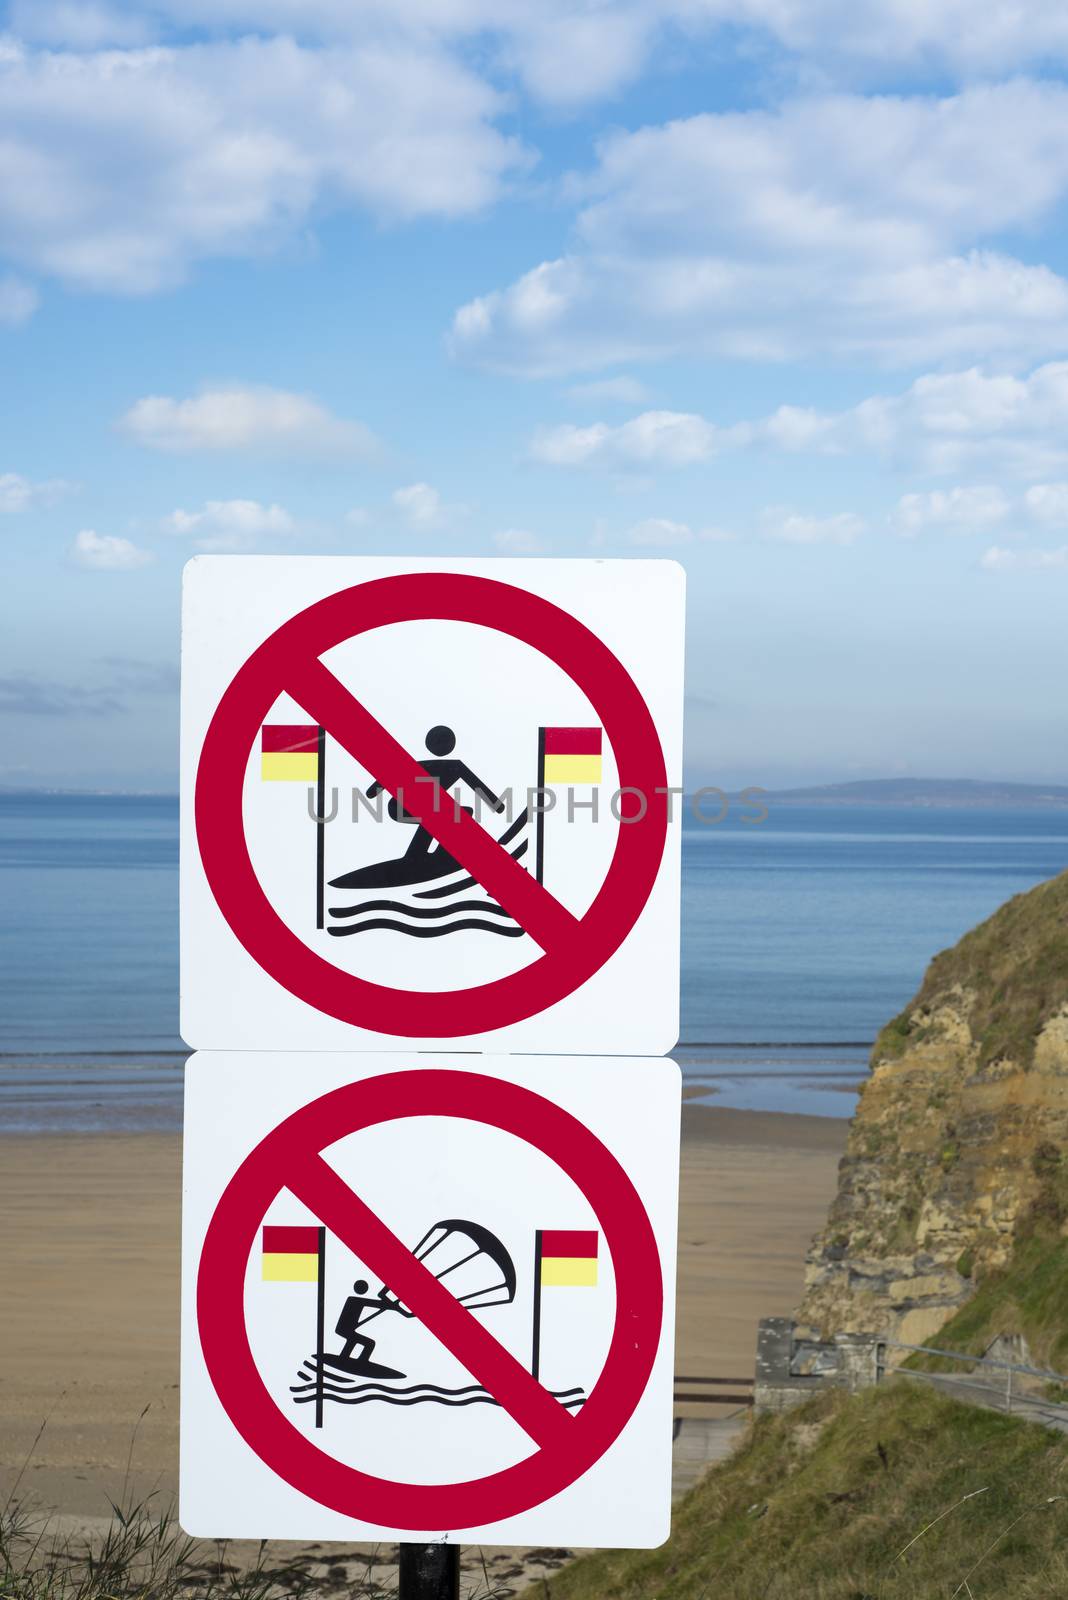 warning signs for surfers in ballybunion on the wild atlantic way in ireland